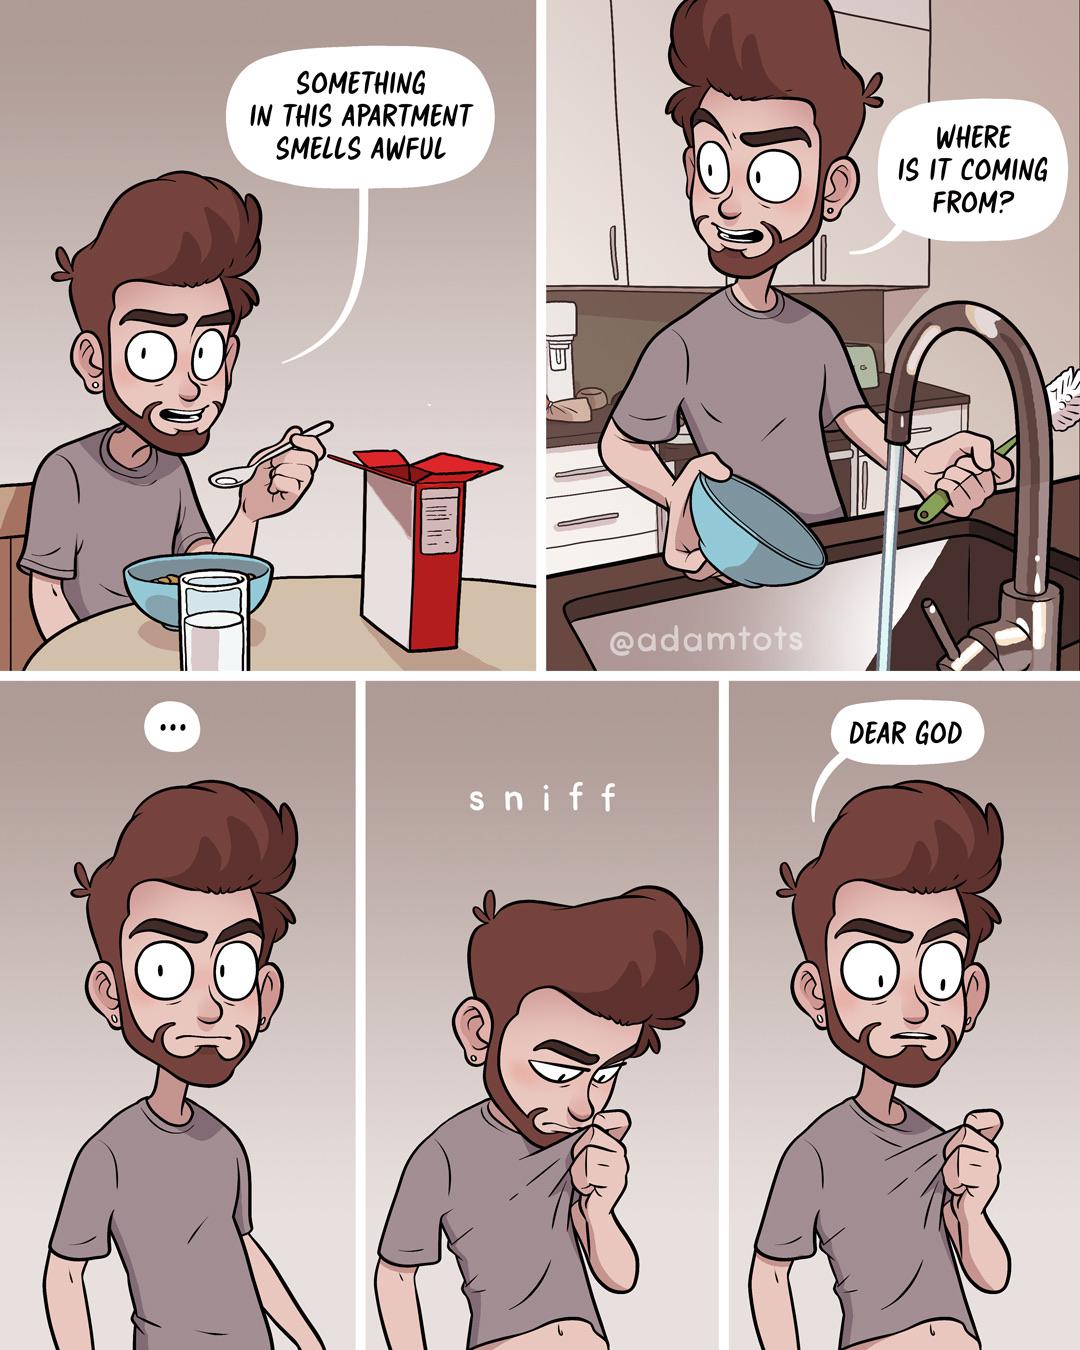 S n i f f (from adamtots_remastered),  Comics S n i f f (from adamtots_remastered),  text: SOMETHING 1M THIS APARTMENT SMELLS AWFUL WHERE IS IT COMING FROM? @adamtots DEAR GOD 